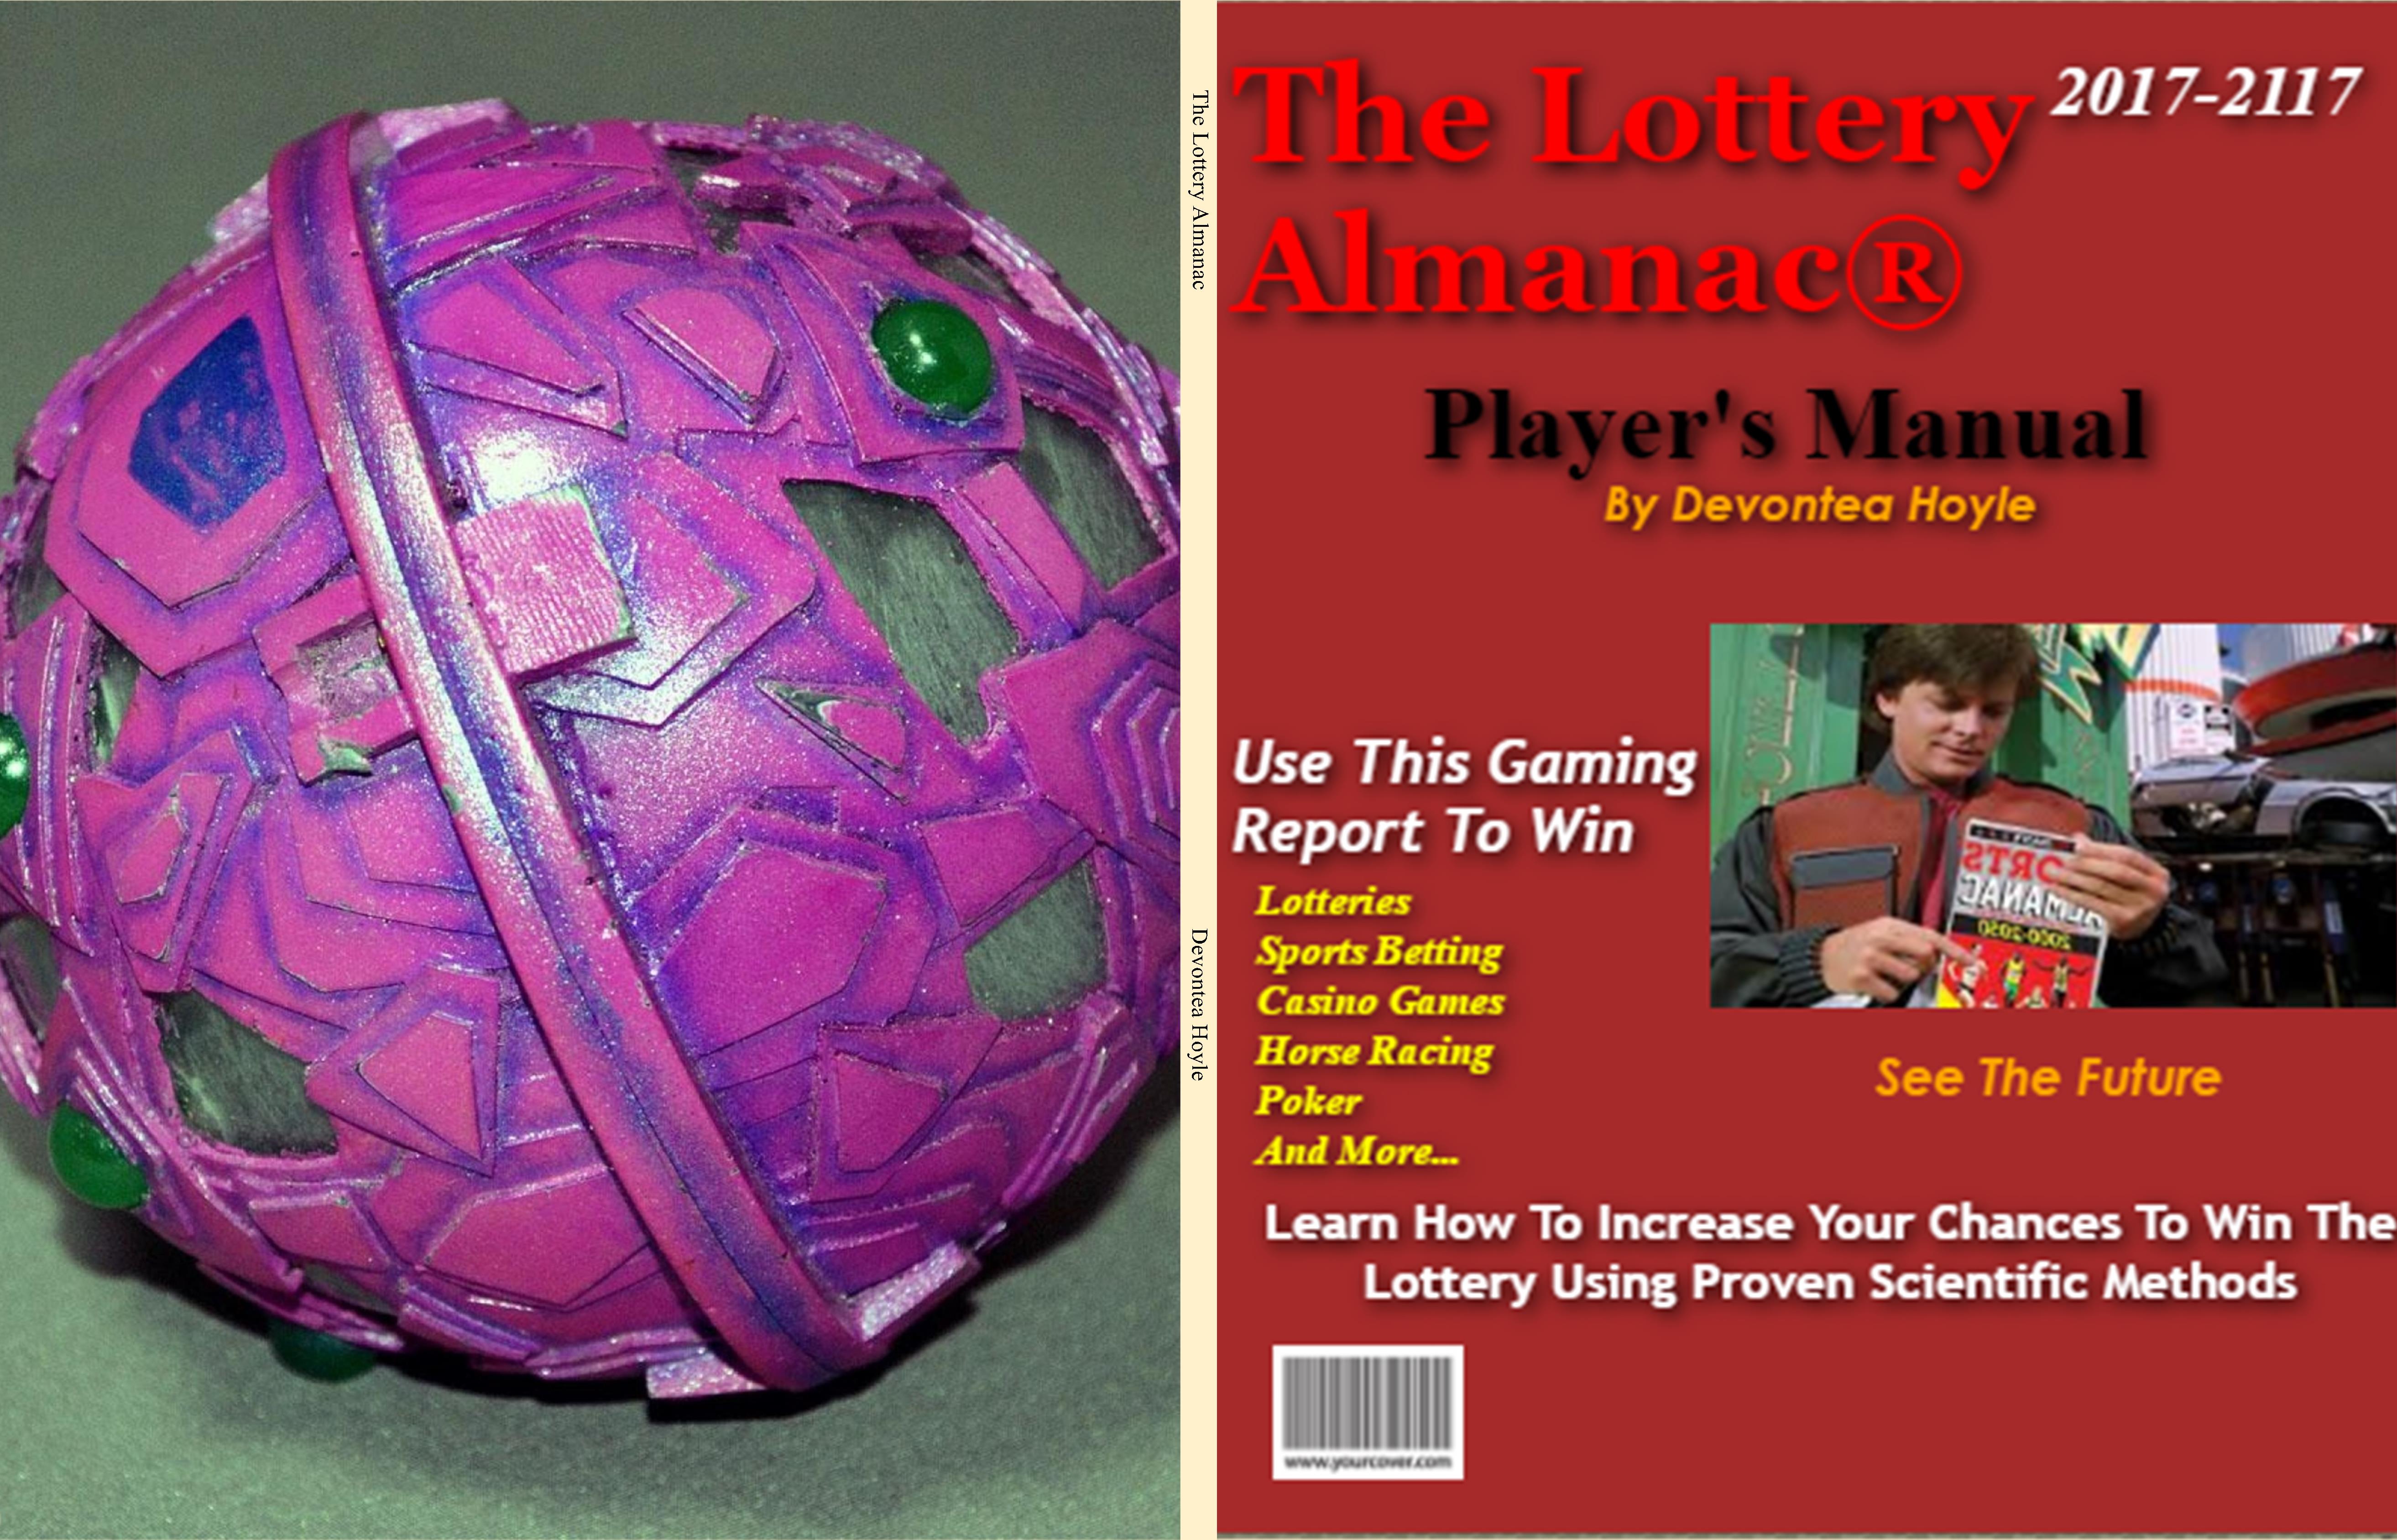 The Lottery Almanac cover image